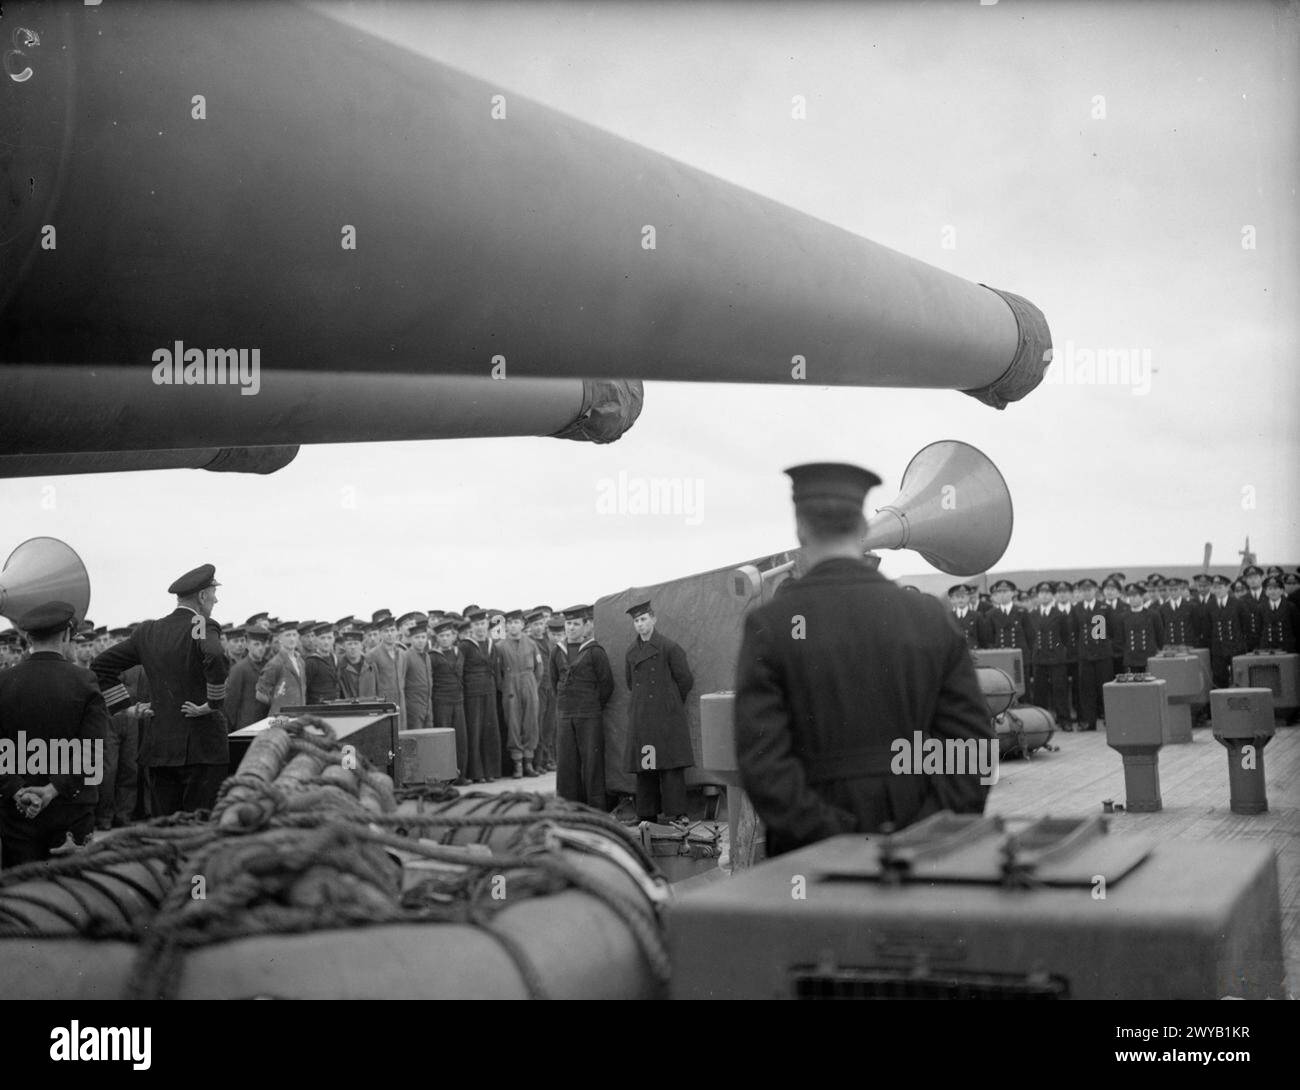 HMS PRINCE OF WALES. APRIL 1941. - The ship's company on the quarterdeck. , Stock Photo